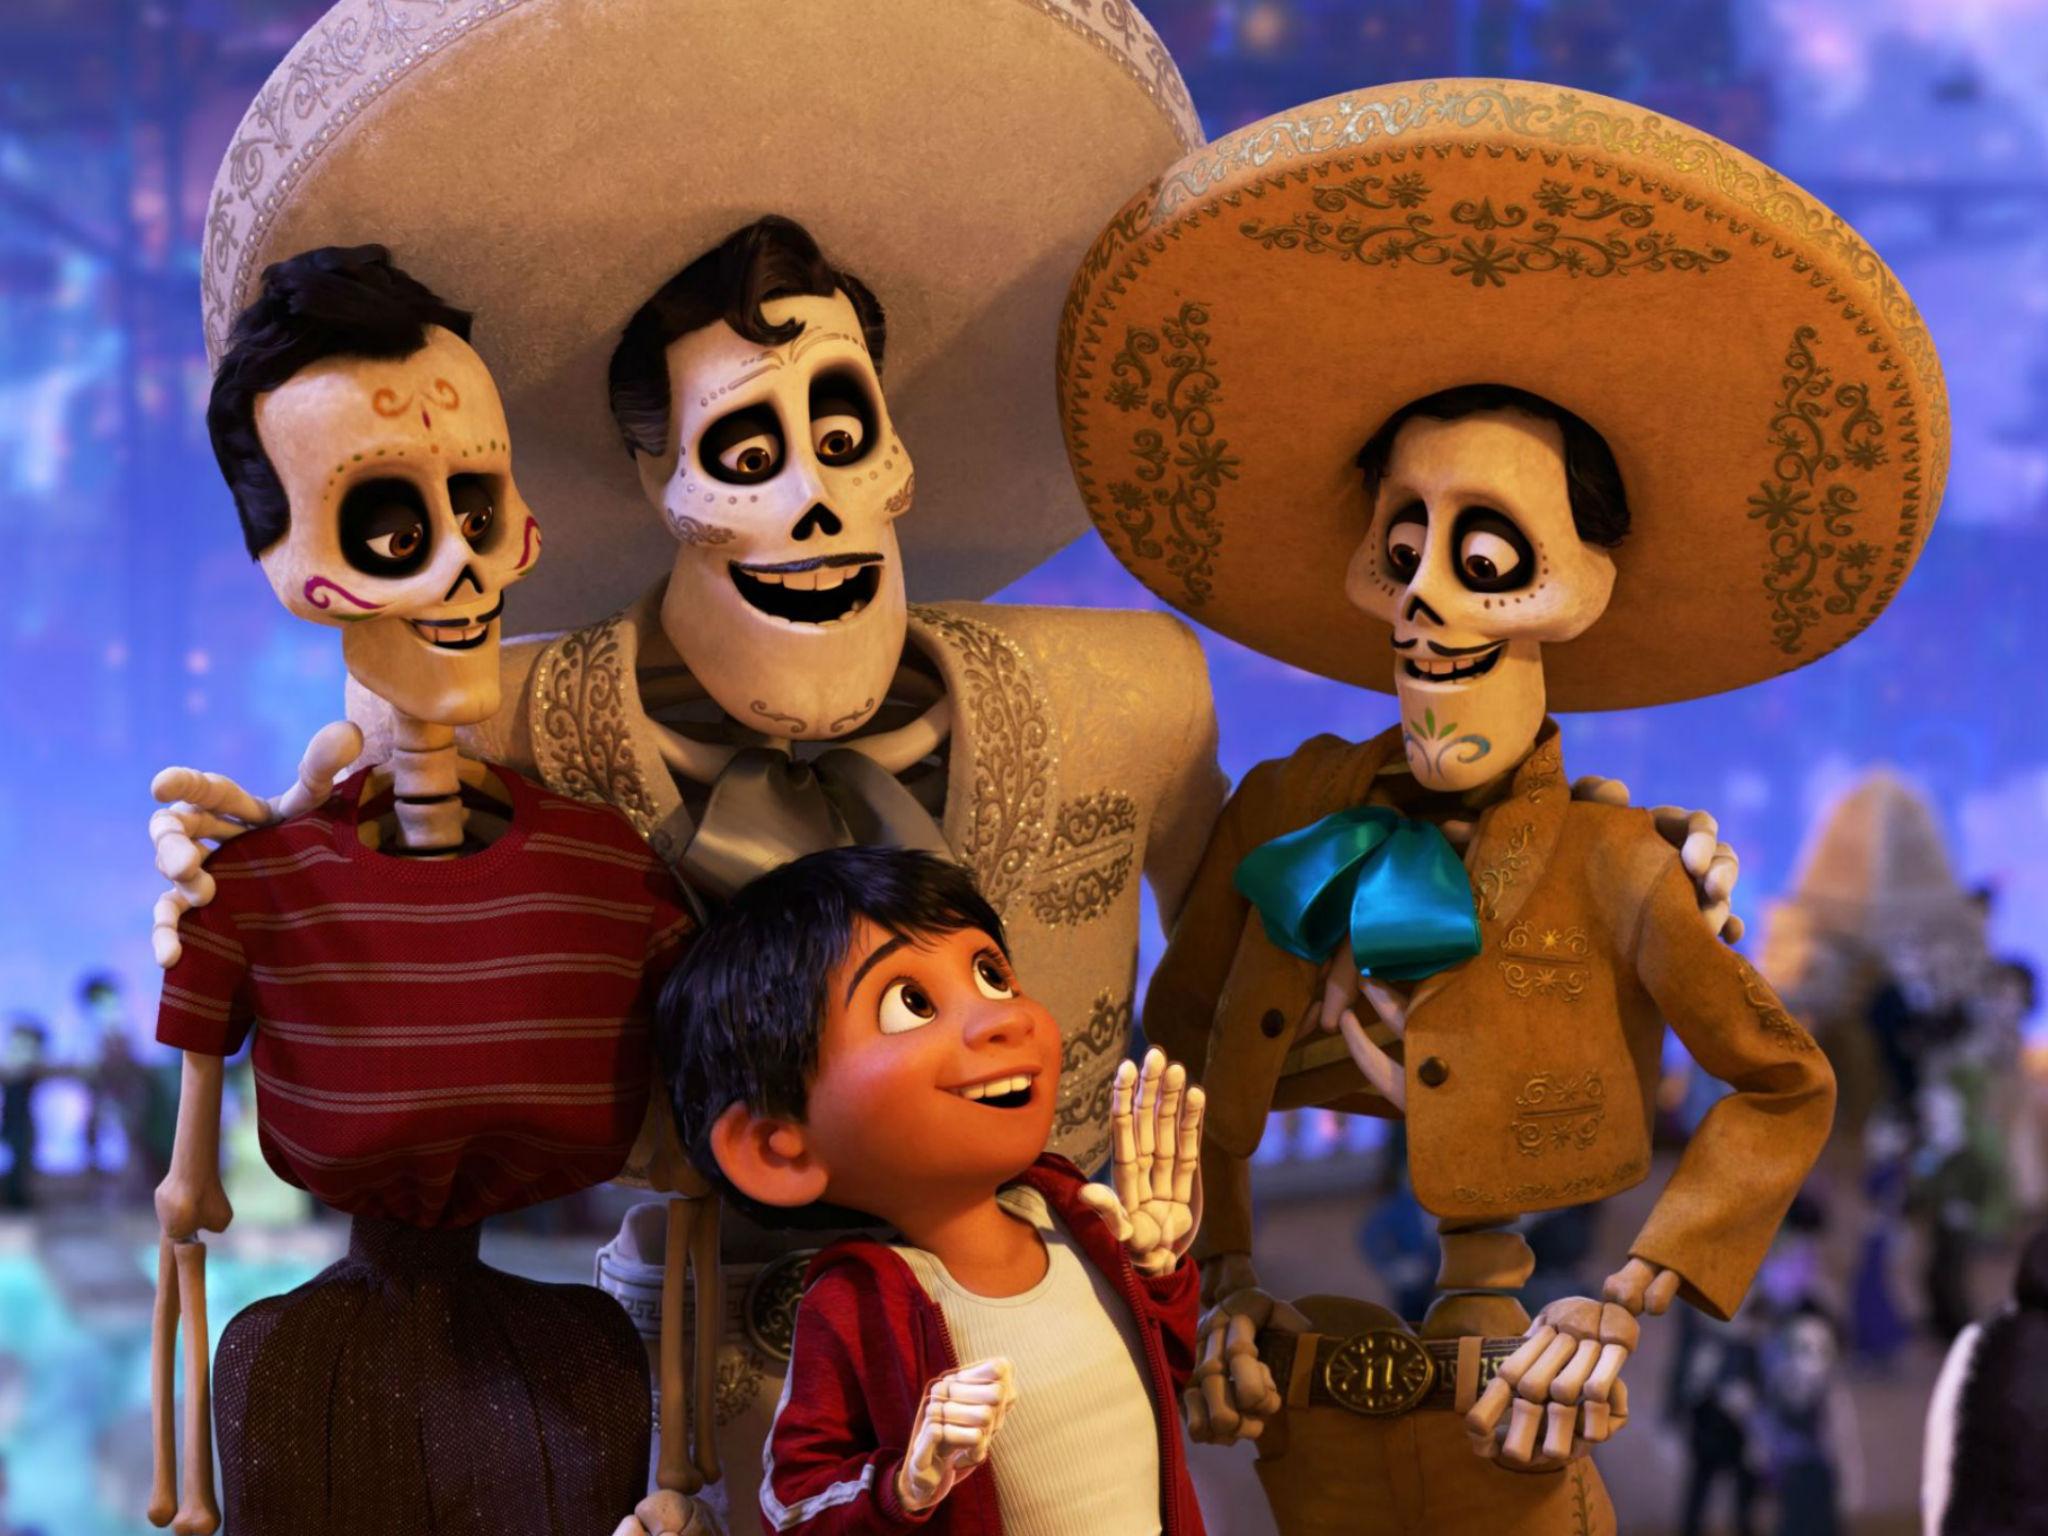 Coco Director Lee Unkrich On Making Adults Cry Pixar Doesn T Make